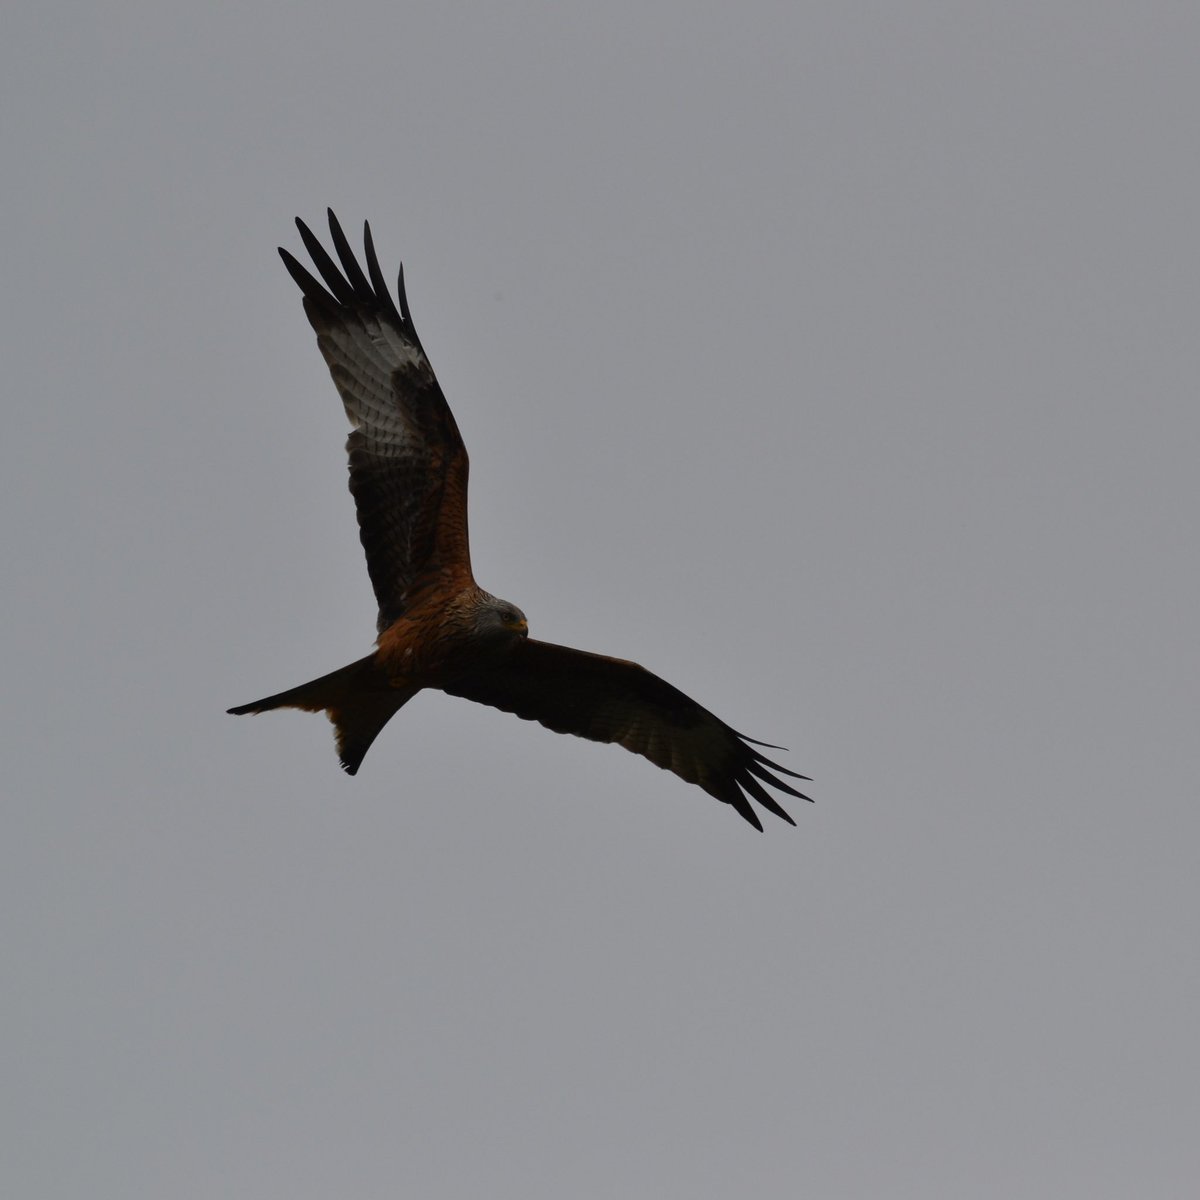 The kite was flying over Bakewell again today #RedKite @Derbyshirebirds